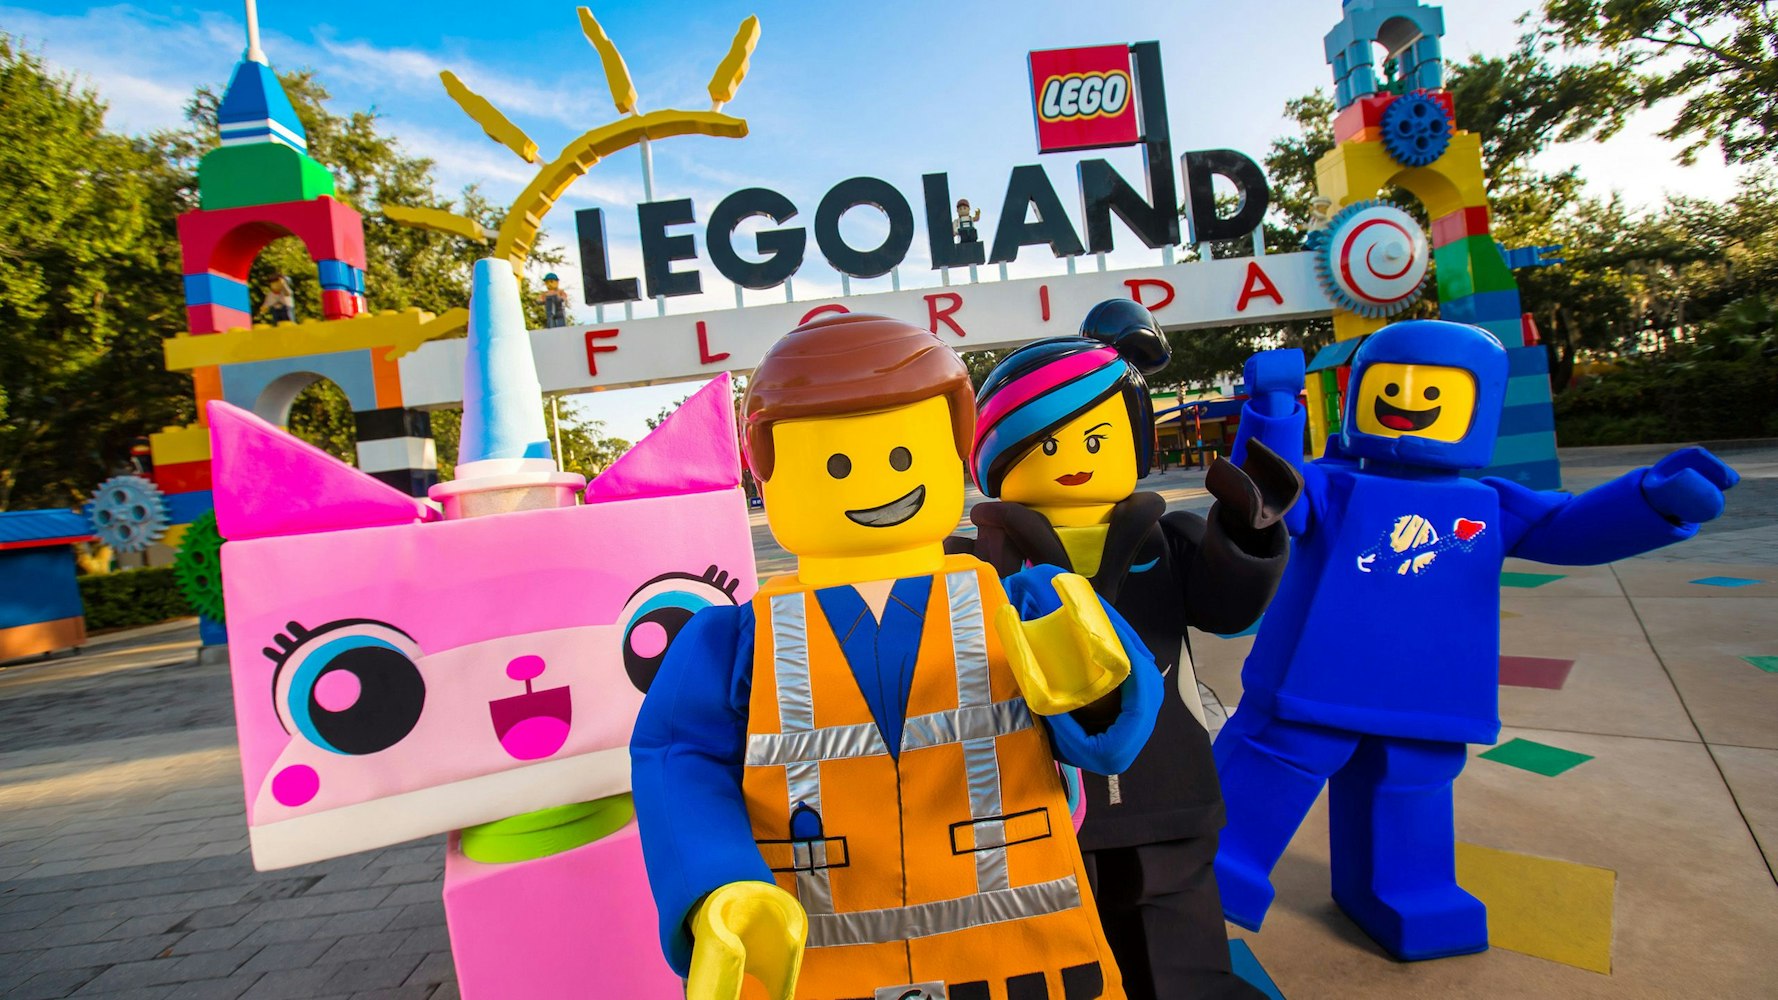 Cover Image for Everything You Need to Know About LEGOLAND Florida’s Brick Dash 5K